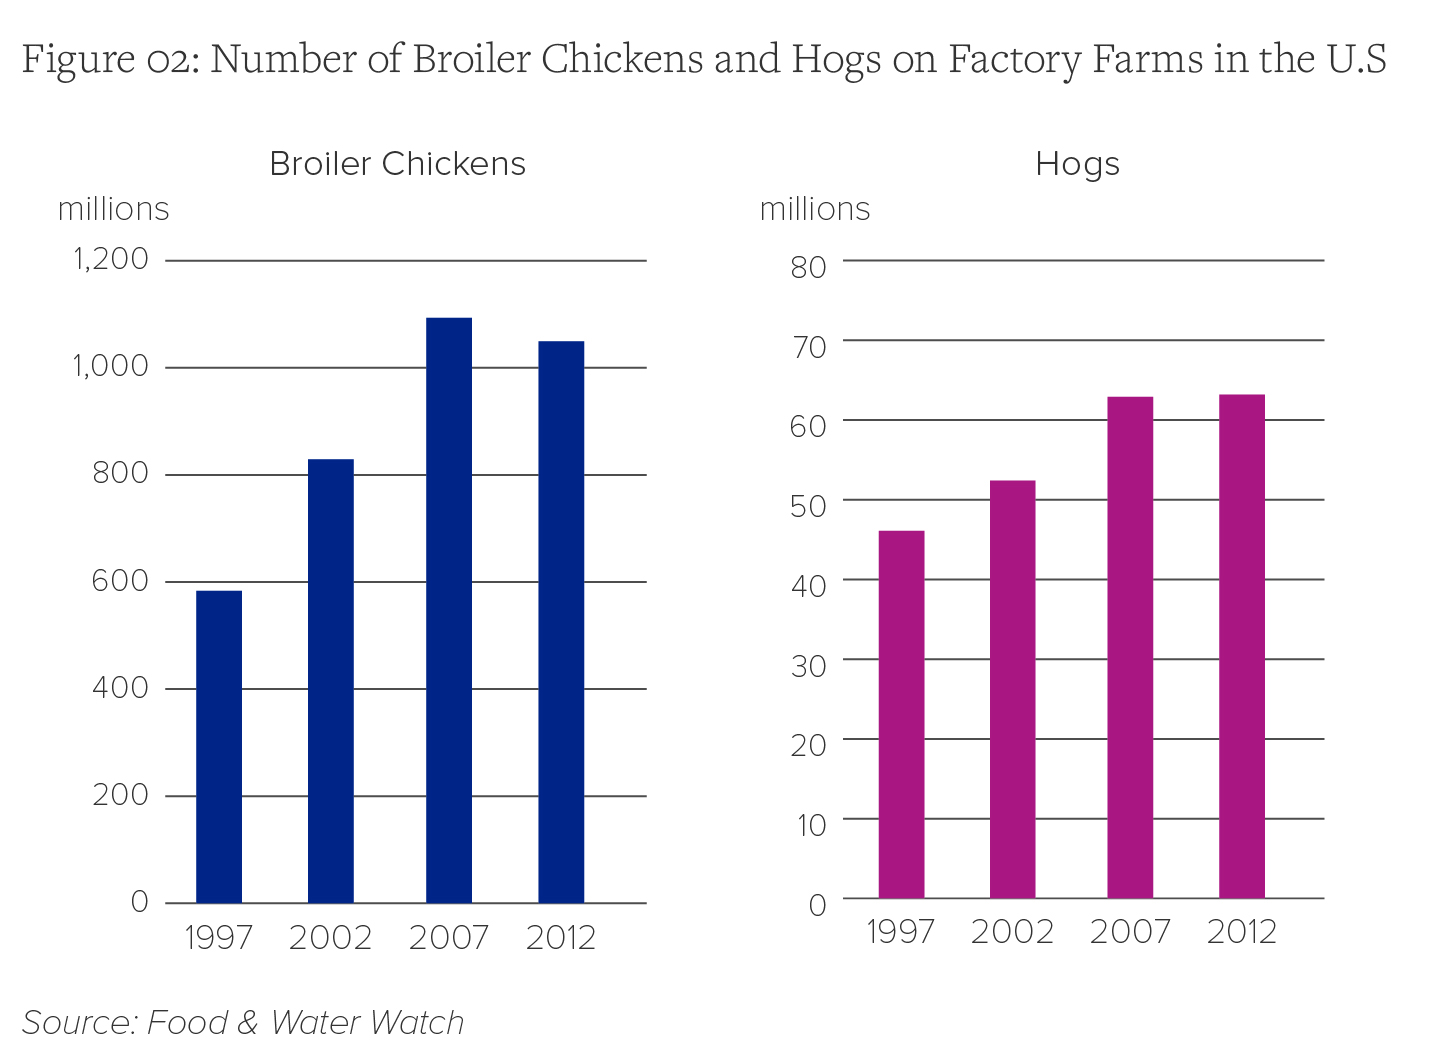 Number of Broiler Chickens and Hogs on Factory Farms in the U.S